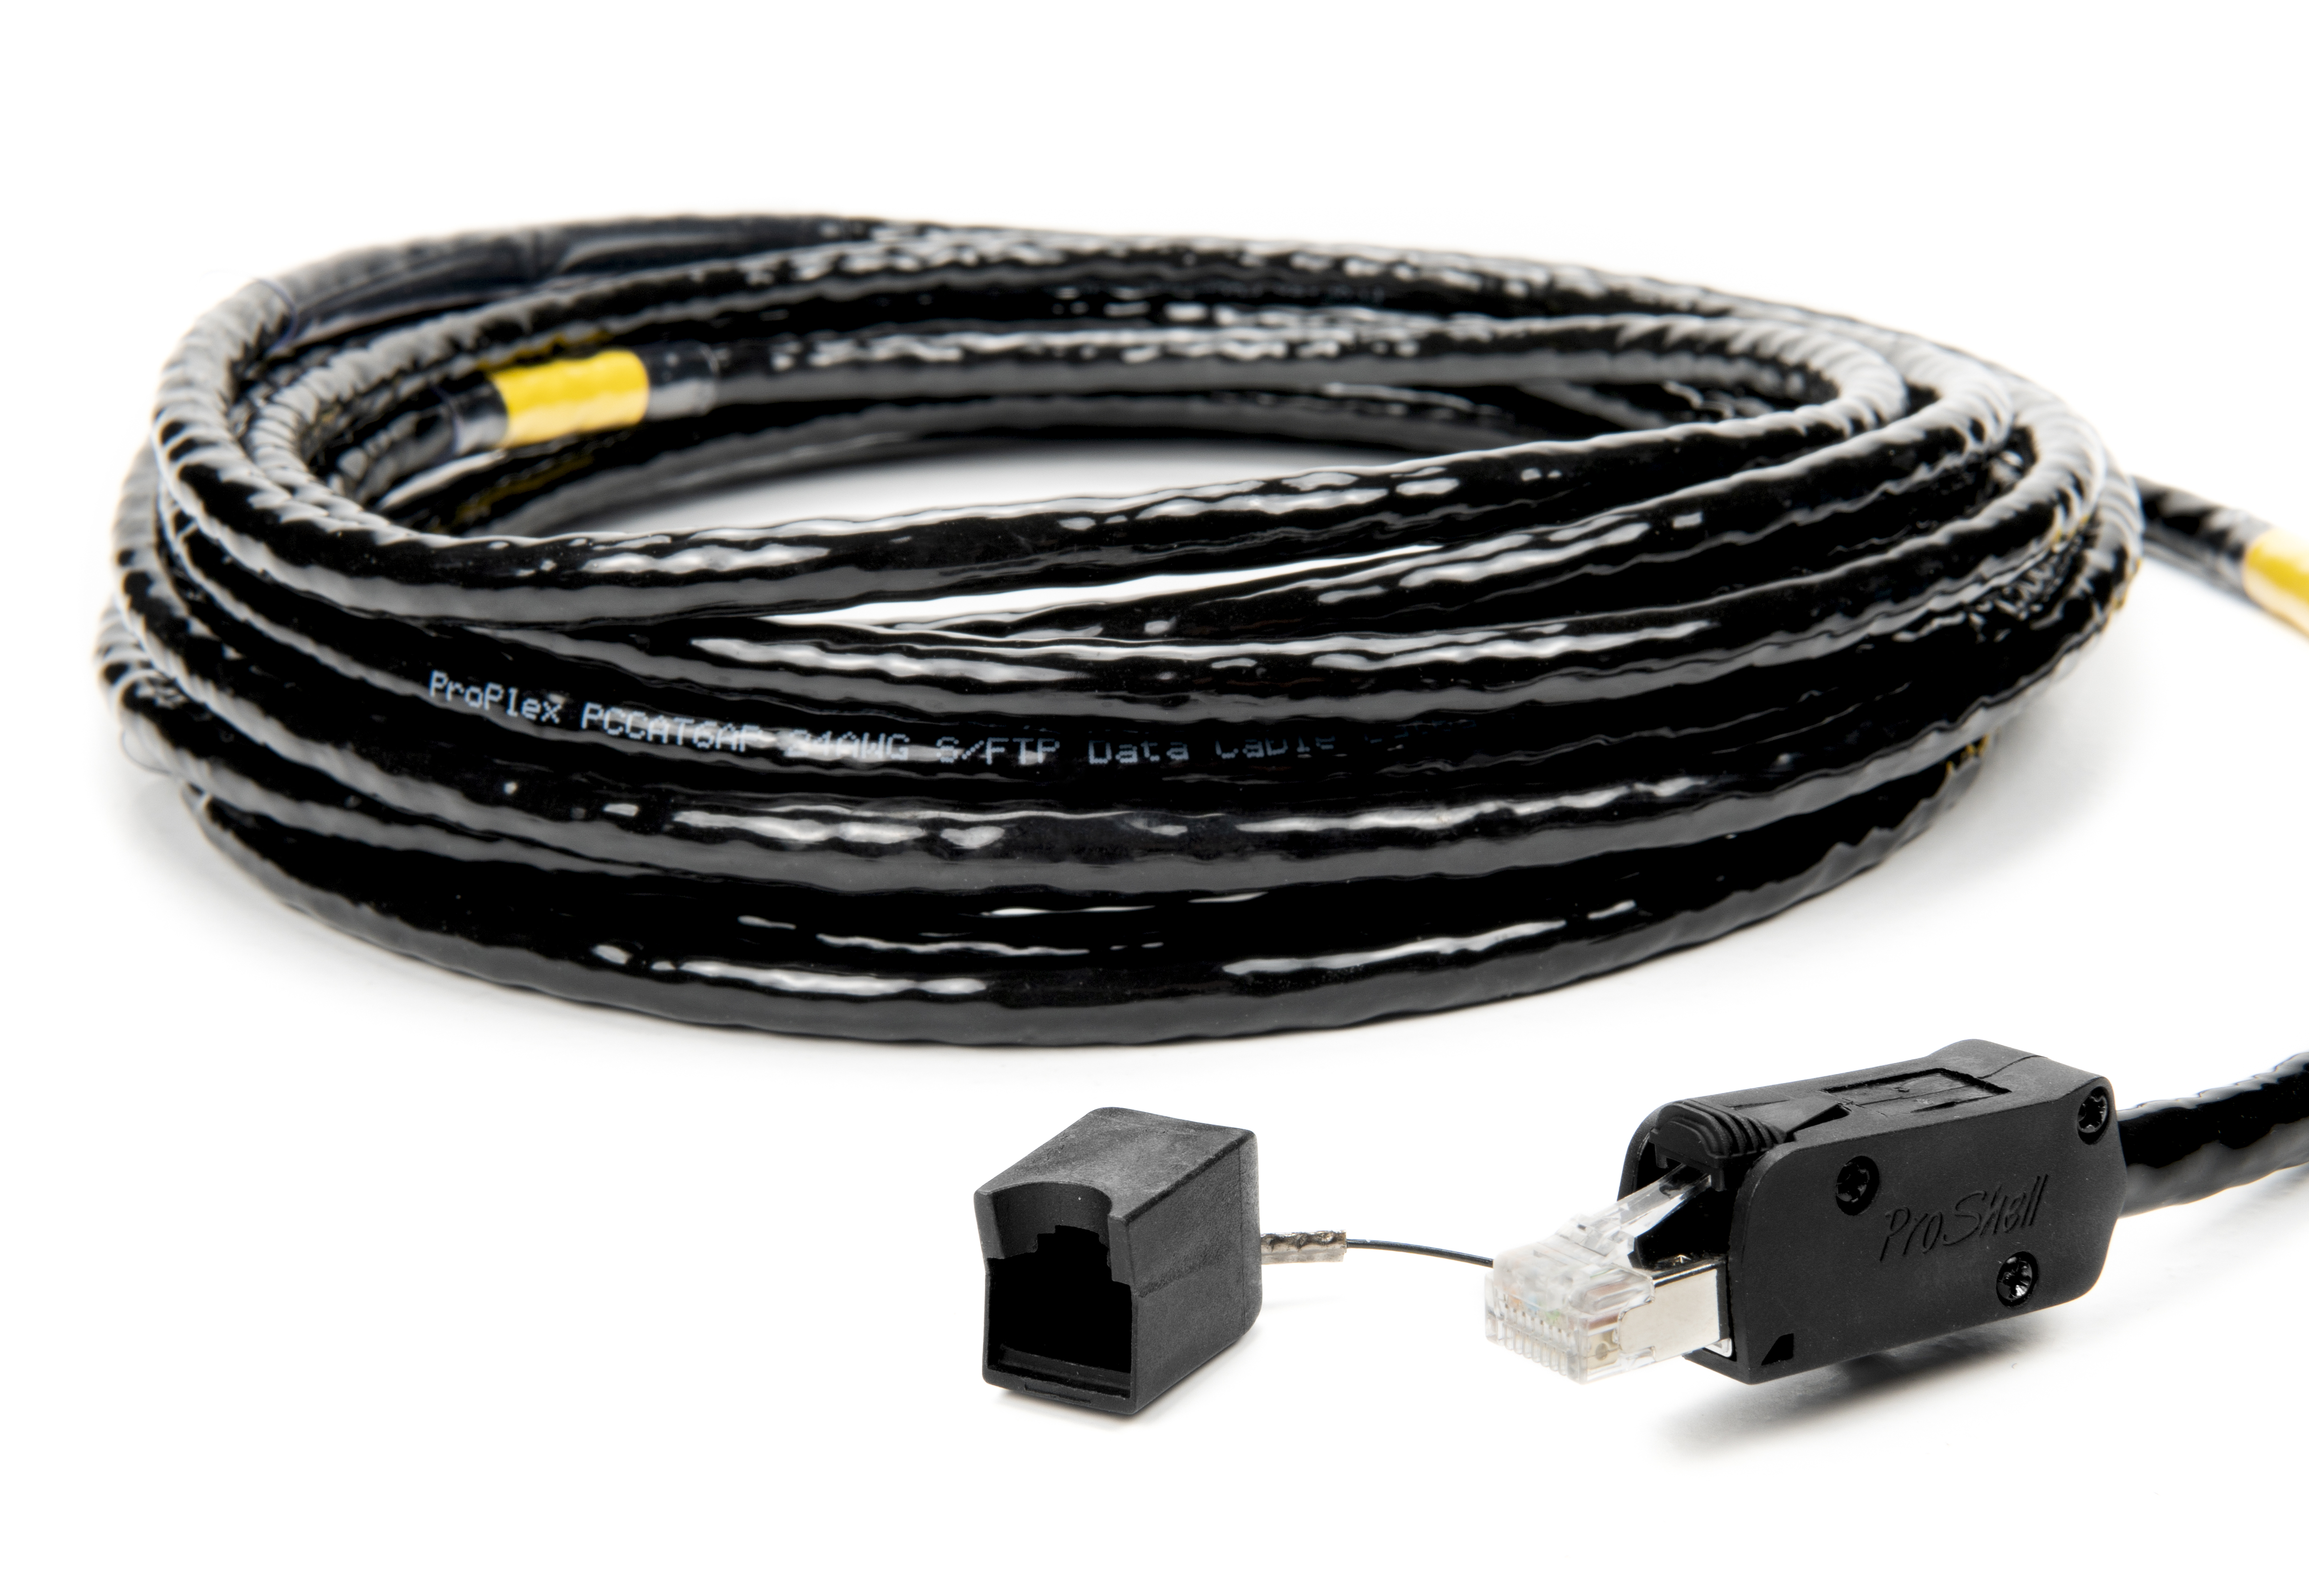     ProPlex Ethernet Cables Adopted by New Markets 